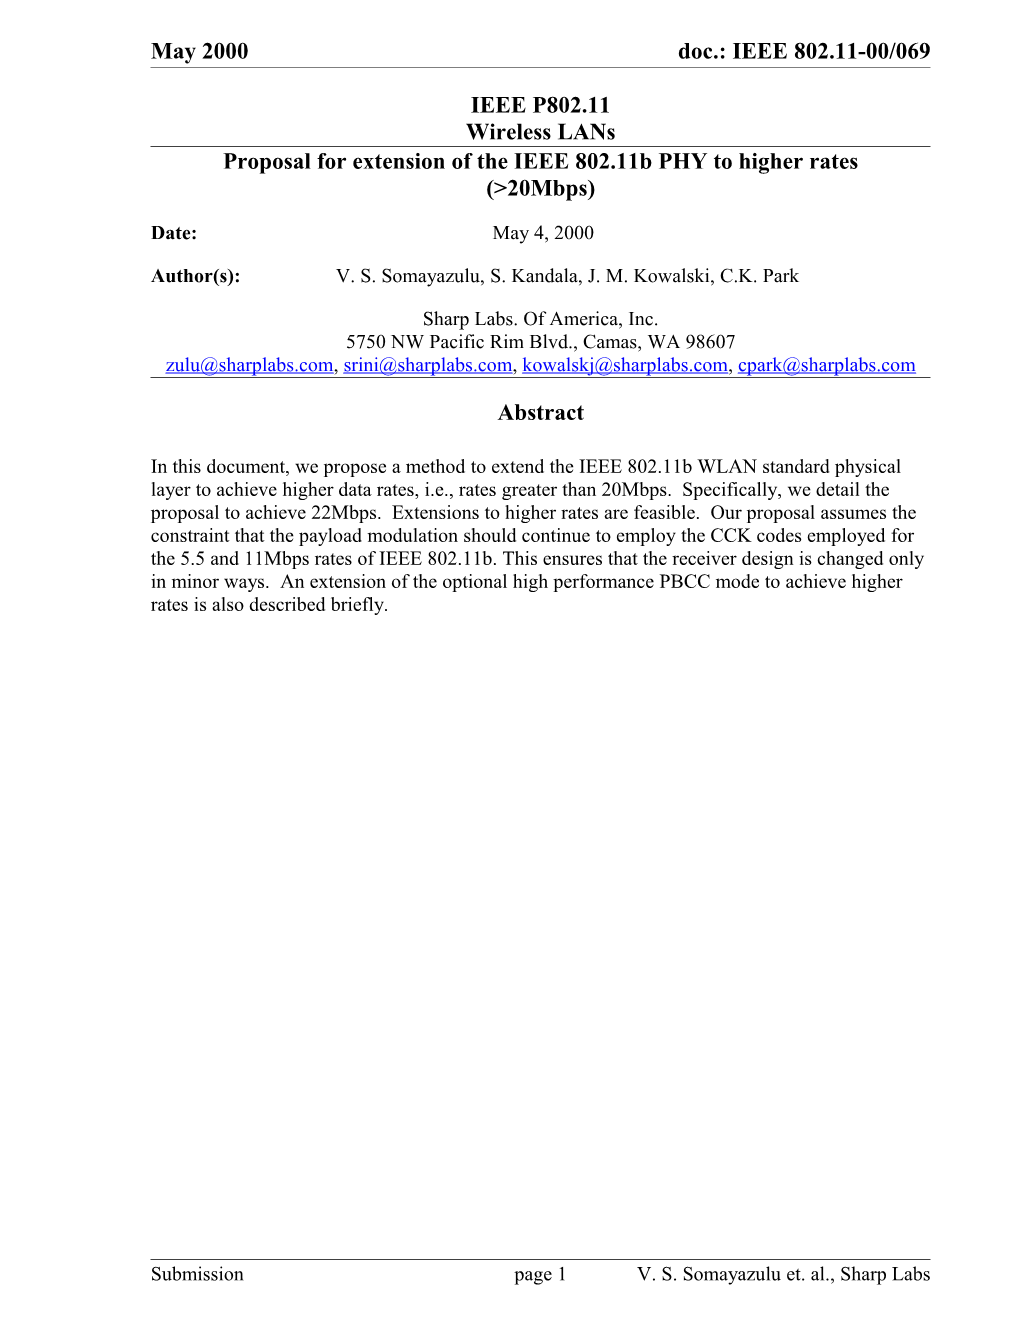 Proposal for Extension of the IEEE 802.11B PHY to Higher Rates (&gt;20Mbps)